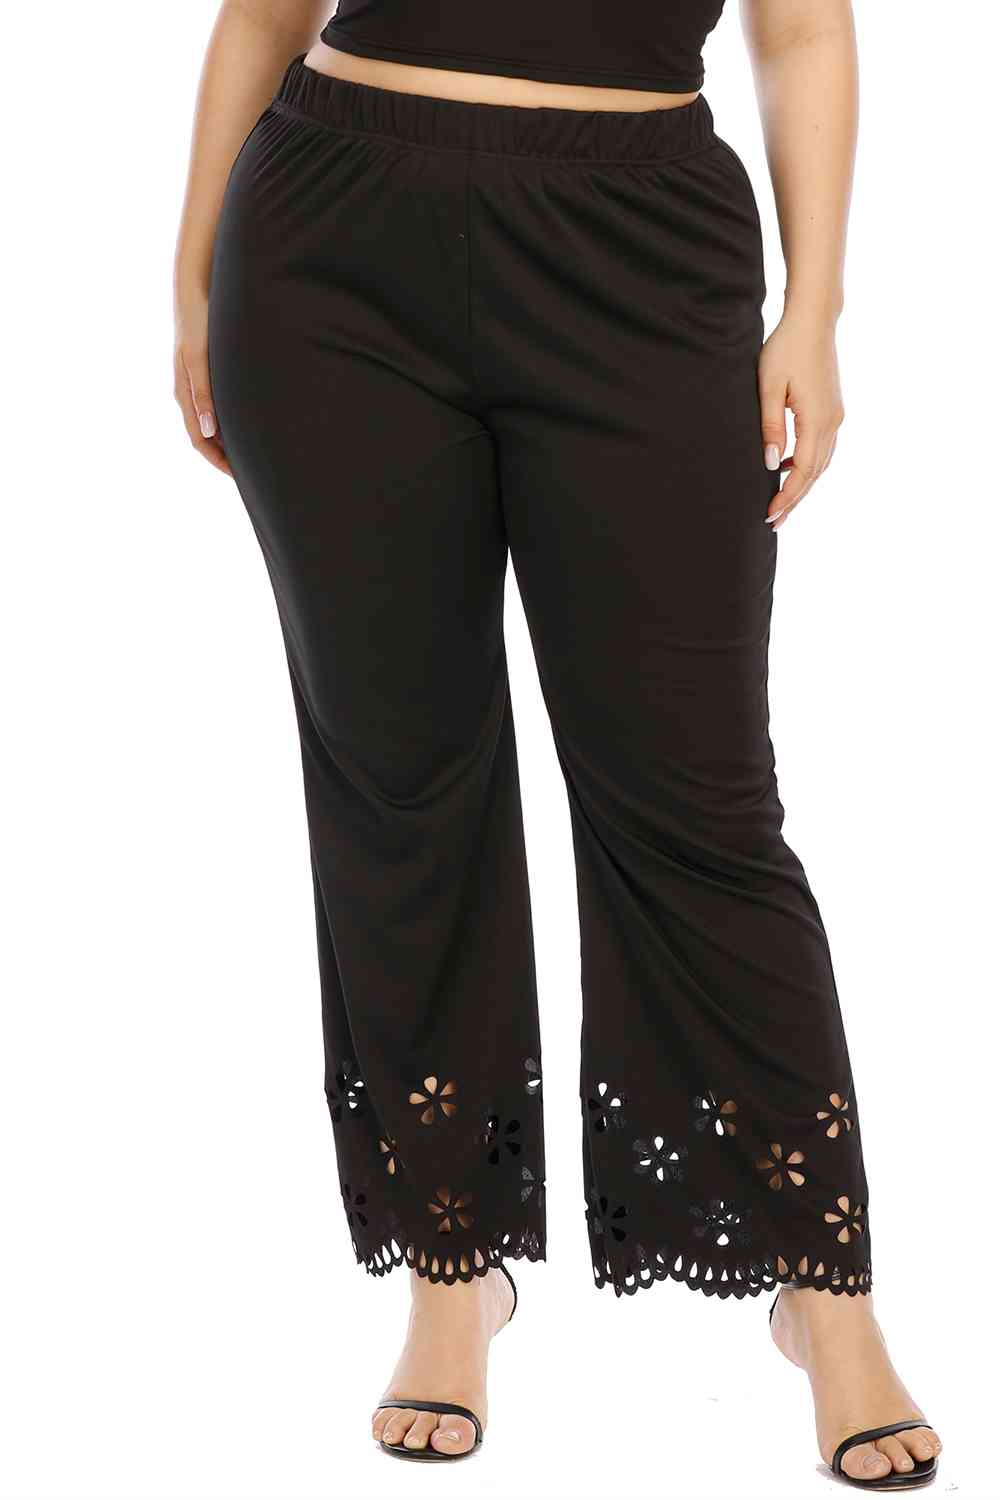 Plus Size Openwork Detail Pants free shipping -Oh Em Gee Boutique